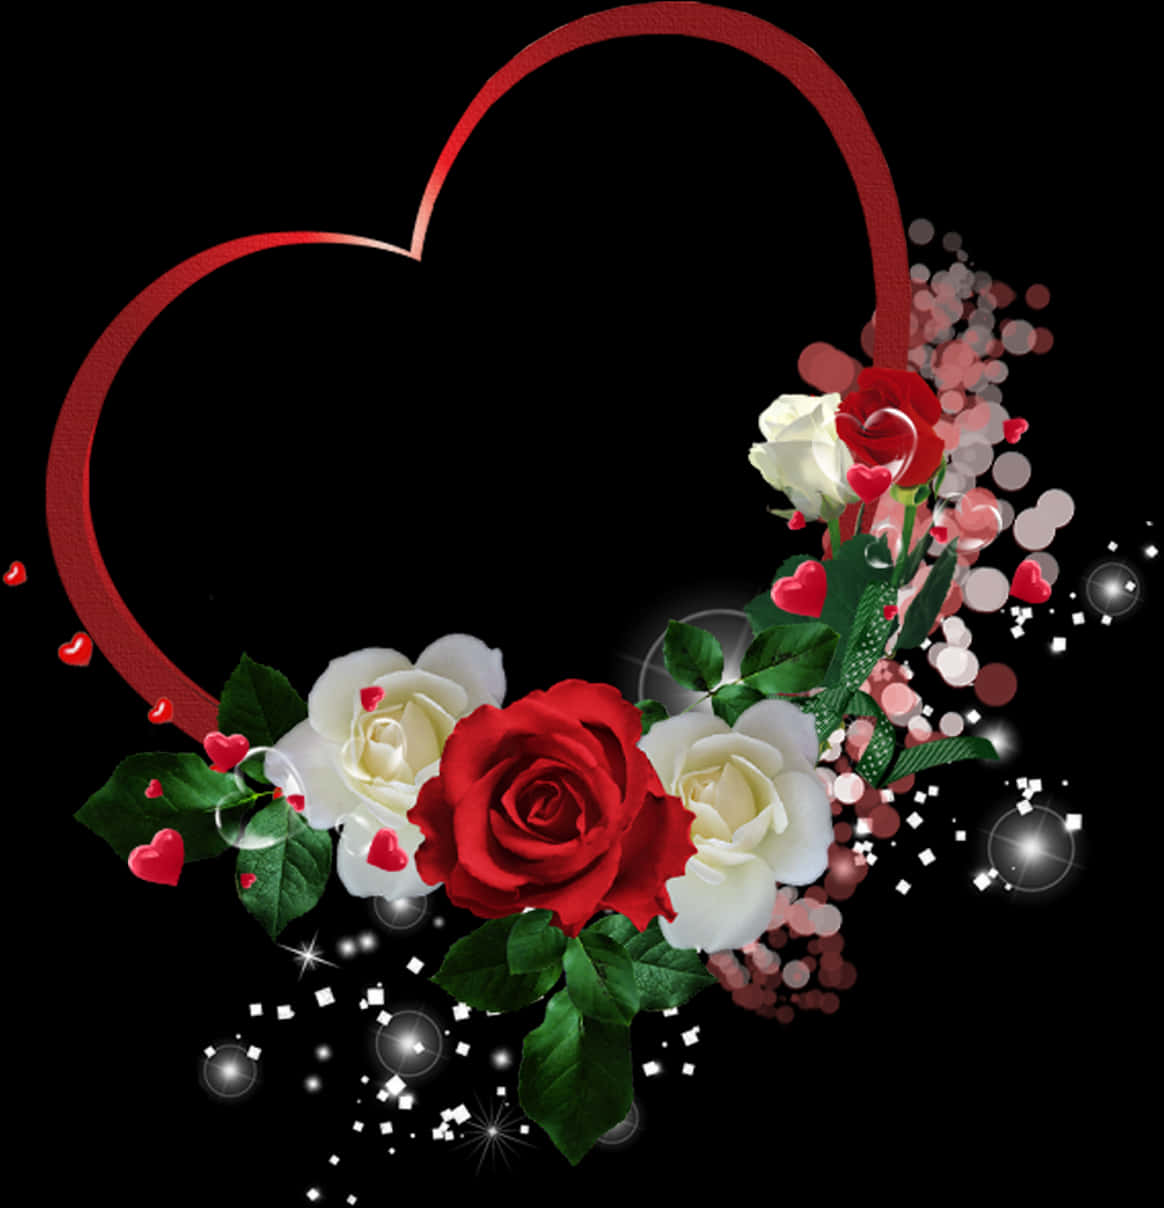 Romantic Heartand Roses Graphic PNG